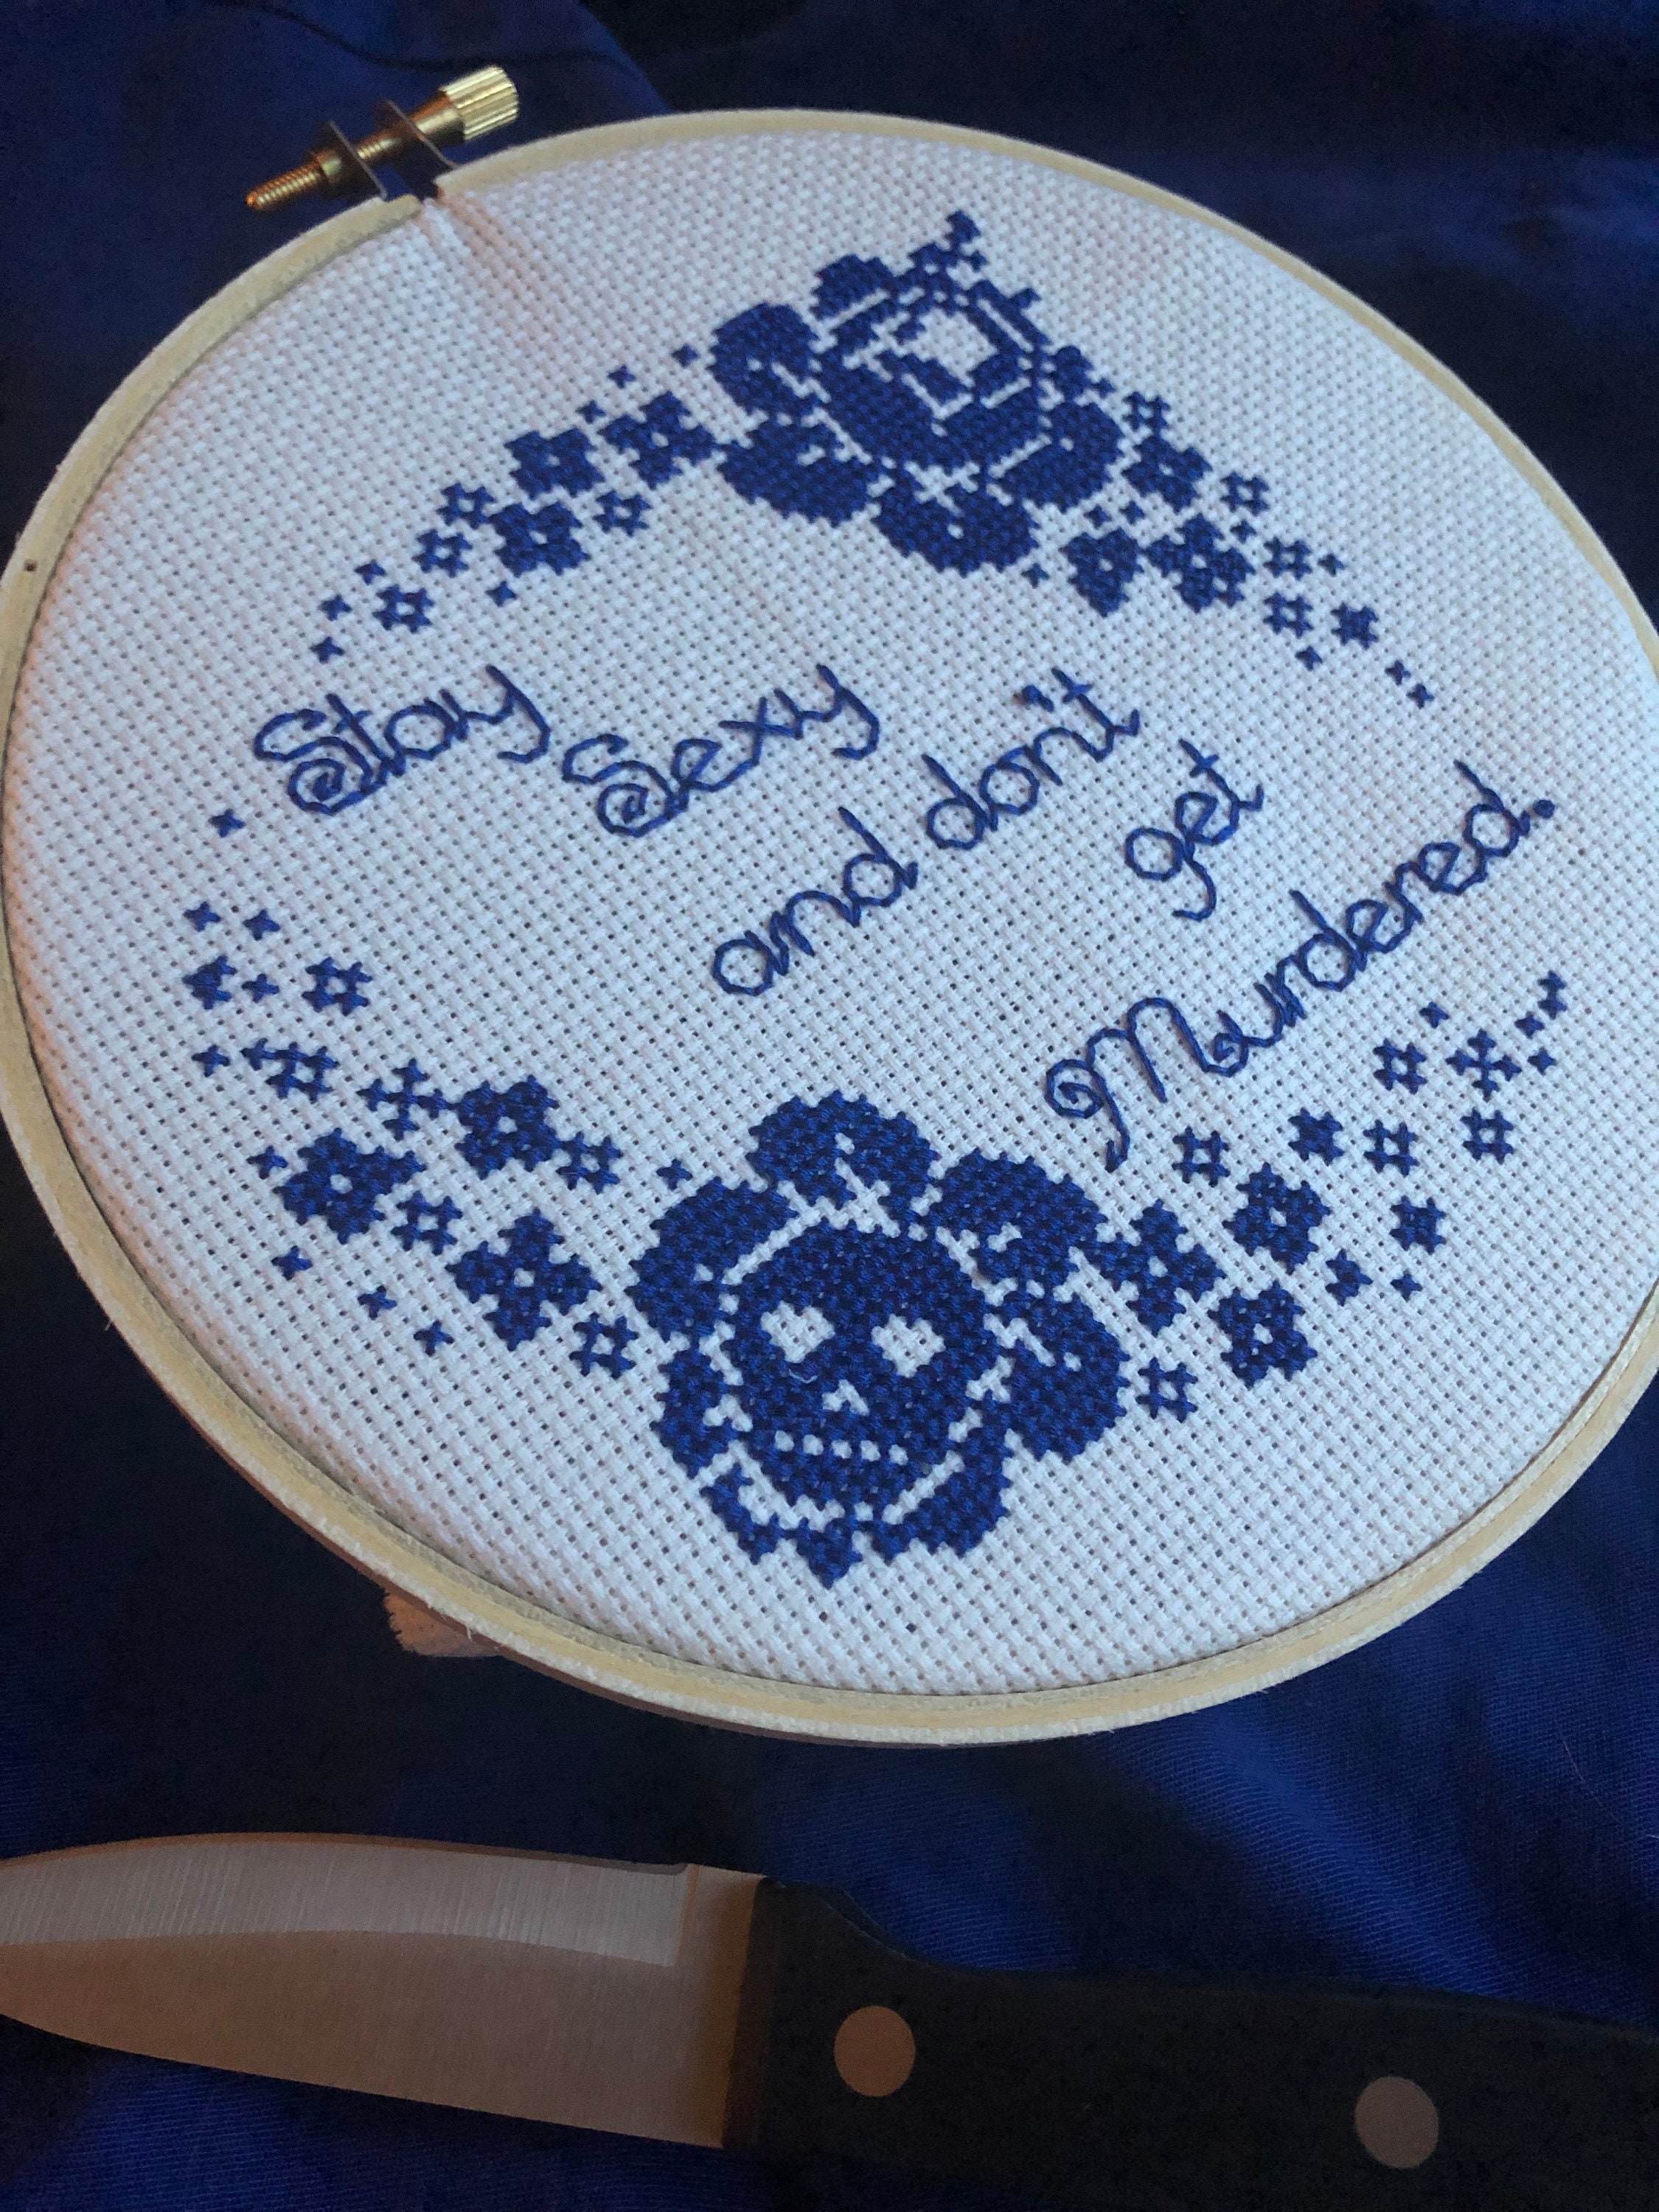 Stay Sexy Don't Get Murdered. Starter Cross Stitch Kit for